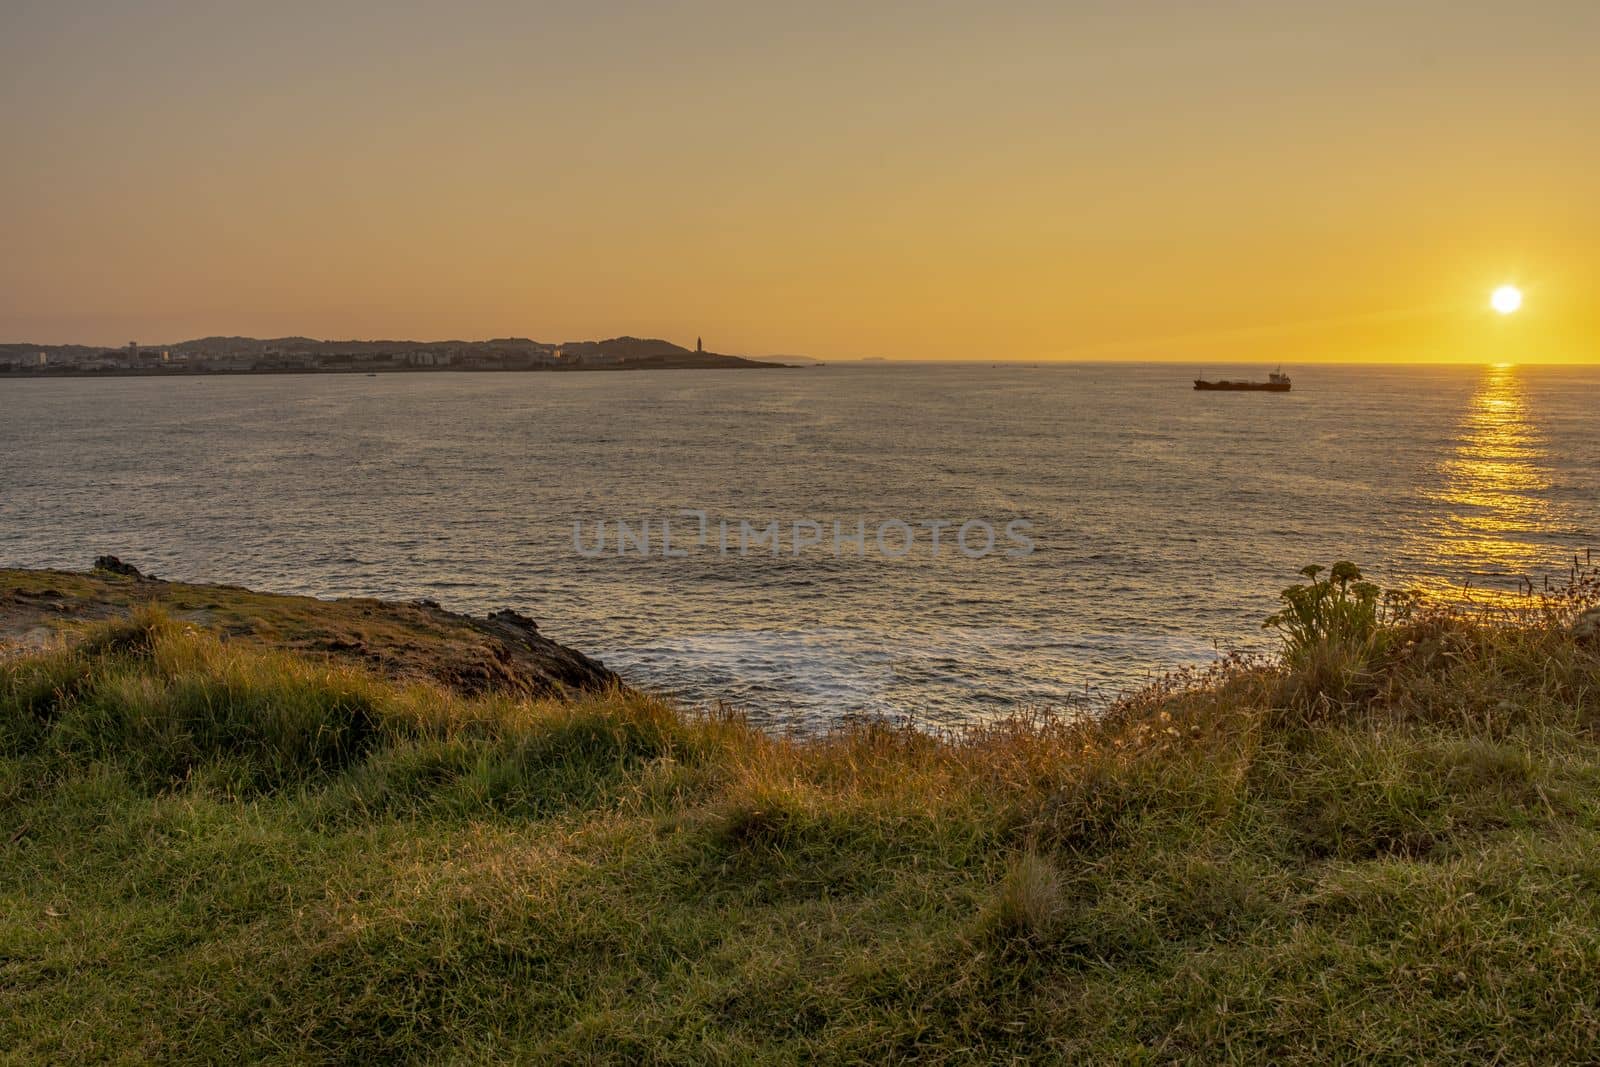 A Coruna sunset with the Atlantic ocean in the background. Photo from Seixo Branco, Oleiros, Galicia. High quality photo